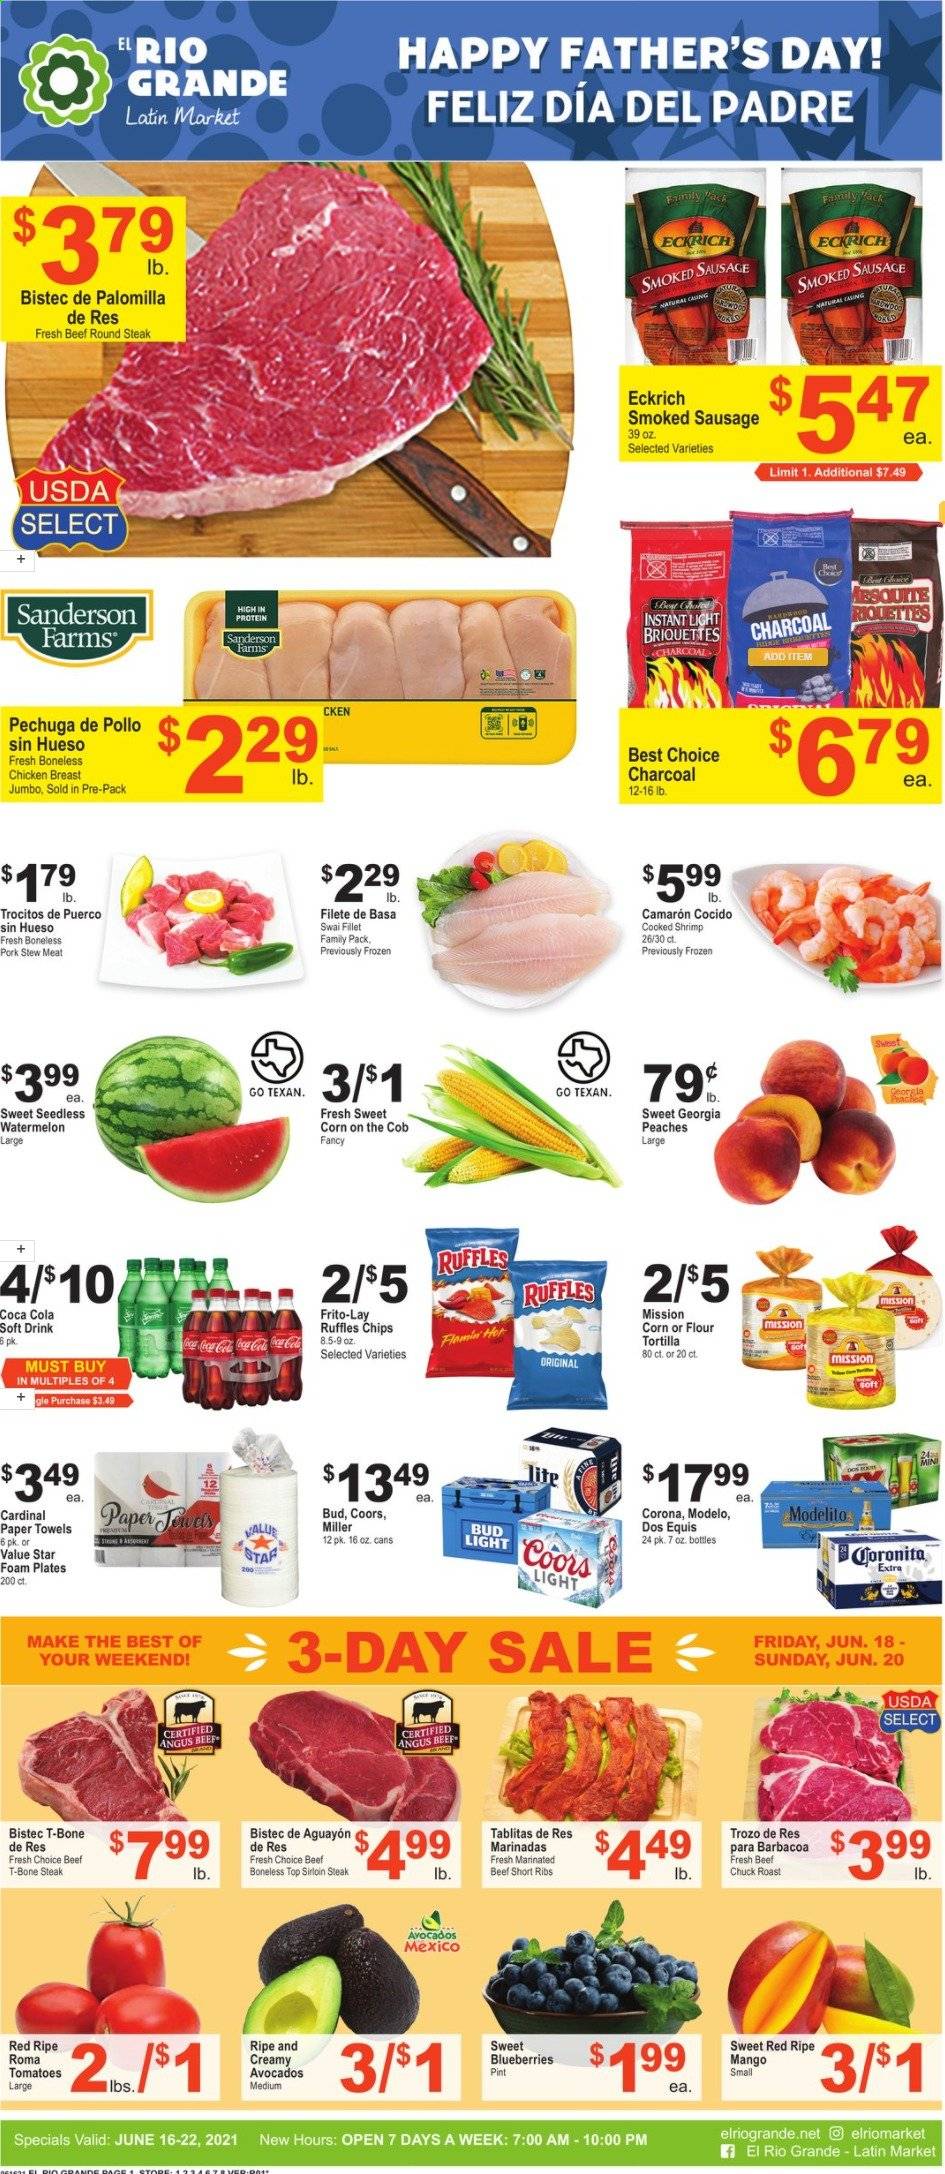 thumbnail - El Rio Grande Flyer - 06/16/2021 - 06/22/2021 - Sales products - Coors, Dos Equis, stew meat, tortillas, corn, tomatoes, sweet corn, avocado, blueberries, mango, watermelon, shrimps, swai fillet, sausage, smoked sausage, Frito-Lay, Ruffles, Coca-Cola, soft drink, beer, Bud Light, Corona Extra, Miller, Modelo, chicken breasts, beef meat, beef ribs, beef sirloin, t-bone steak, steak, round steak, sirloin steak, chuck roast, marinated beef, peaches. Page 1.